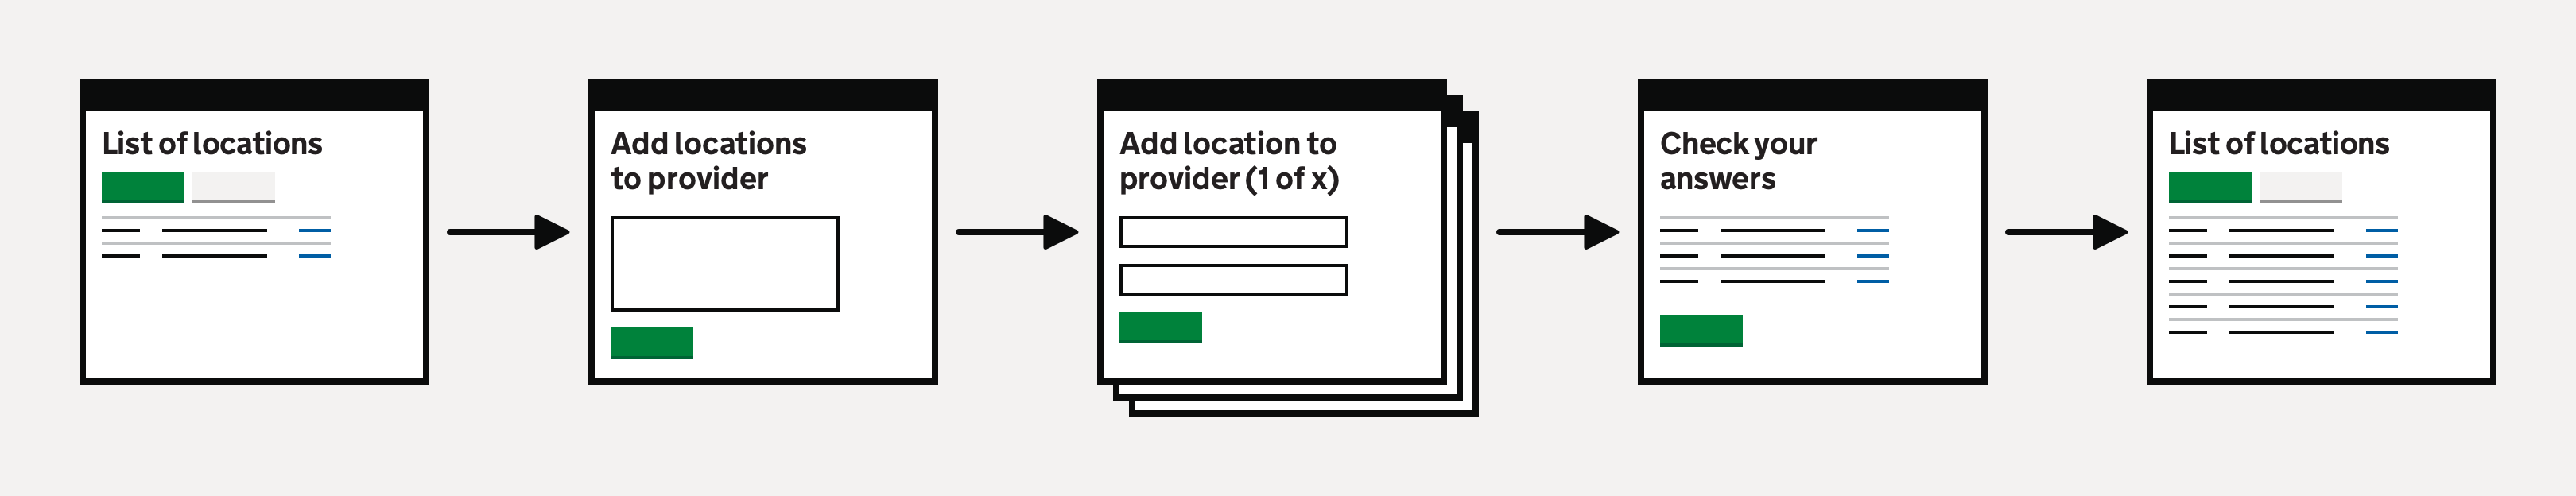 Adding multiple locations to a provider